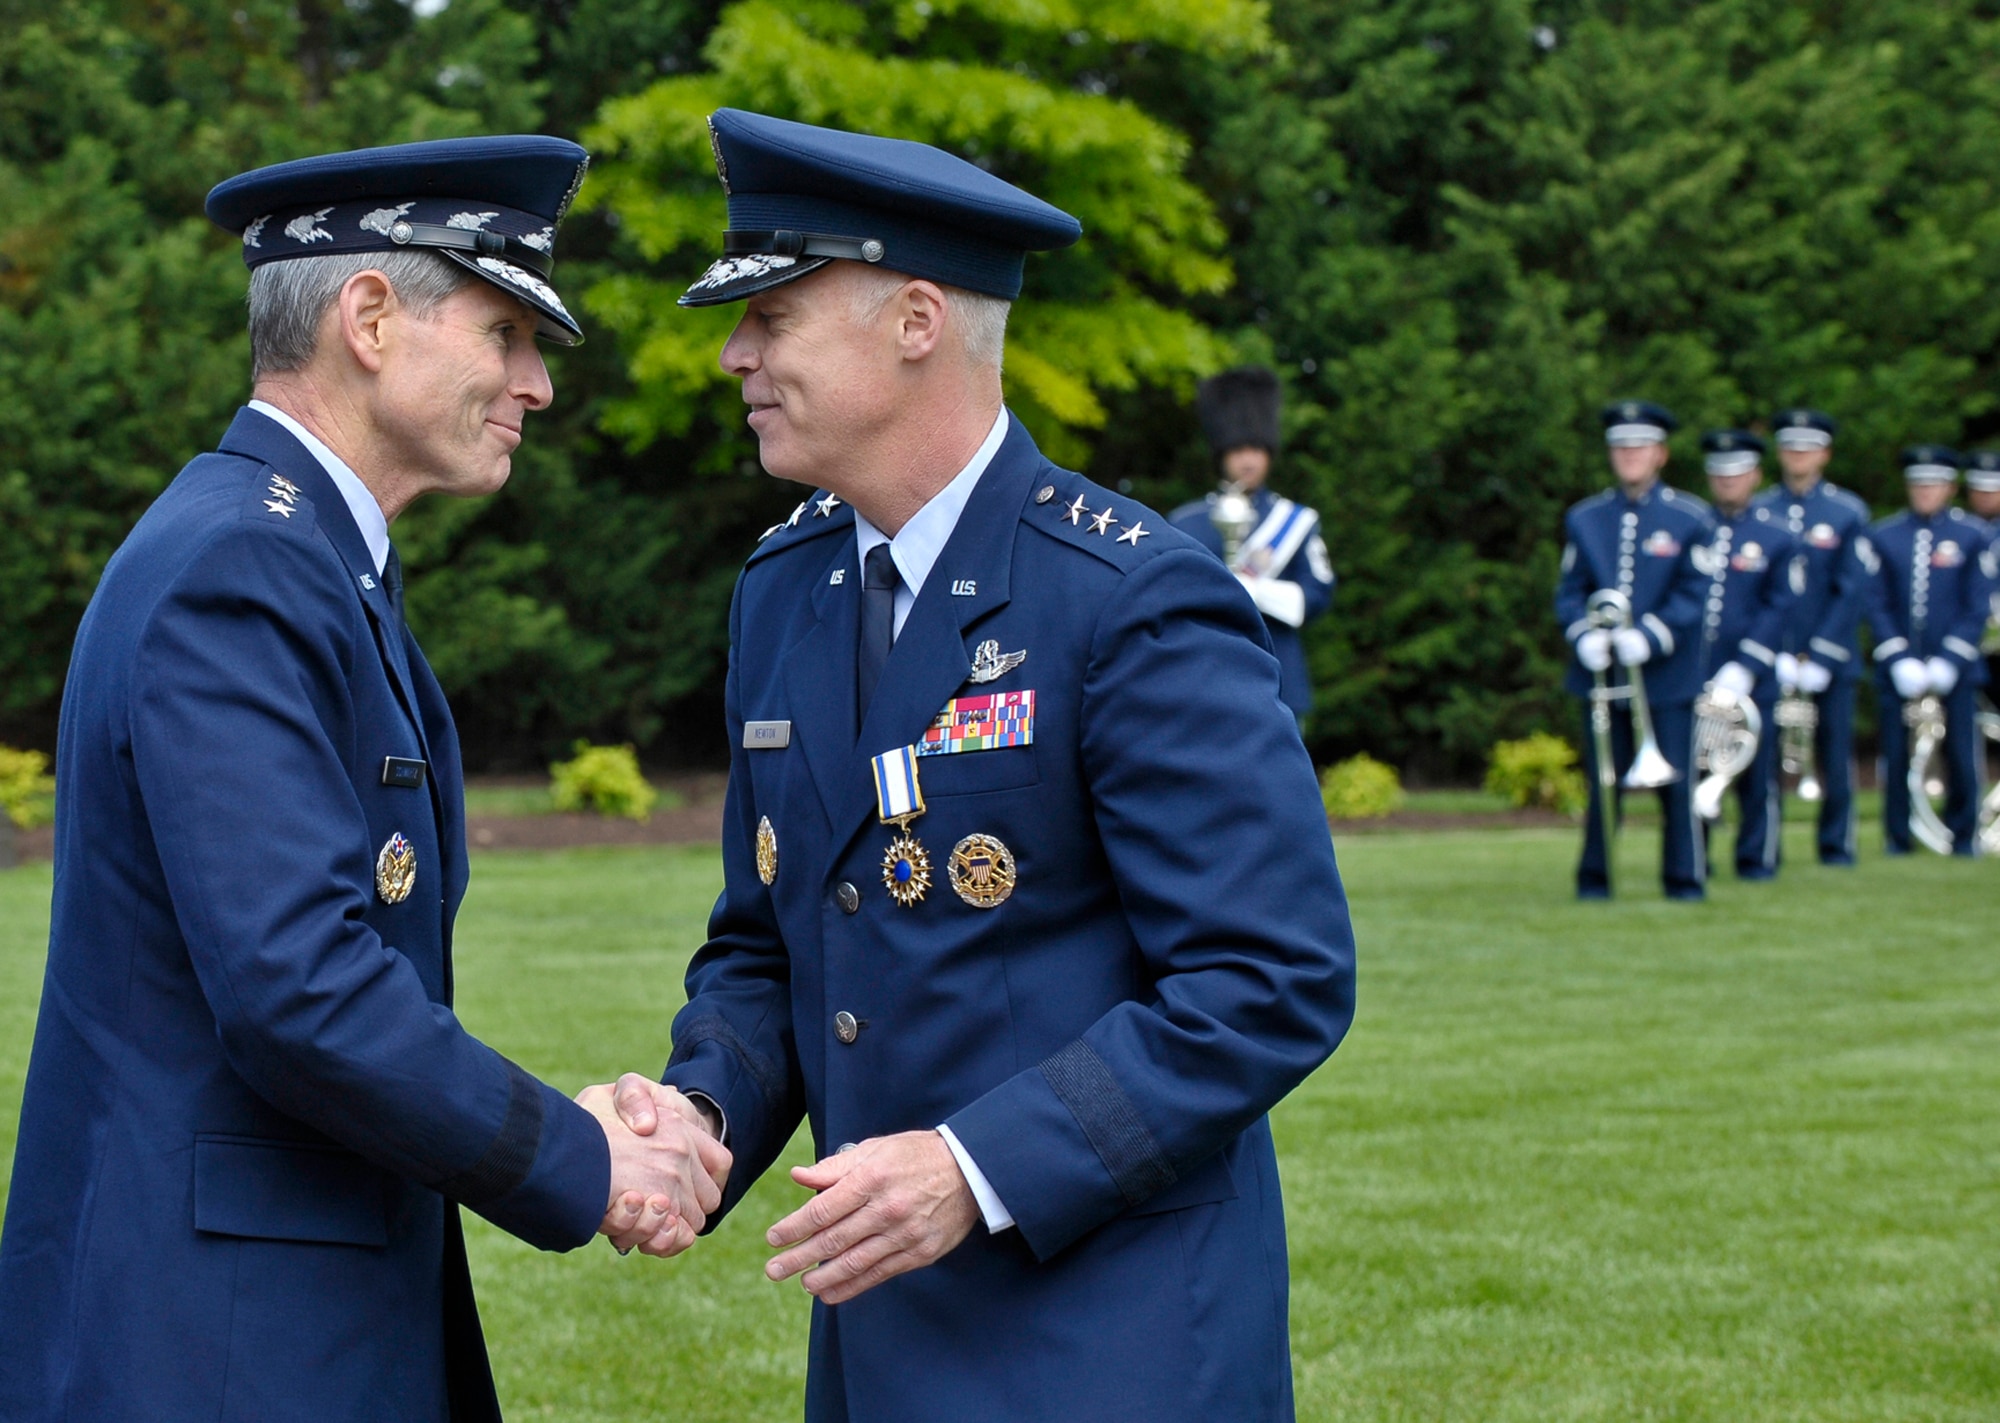 Air Force Chief of Staff Gen. Norton Schwartz congratulates Lt. Gen. Richard Y. Newton III, Assistant Vice Chief of Staff and Director, Air Staff, Headquarters U.S. Air Force, after retiring Newton at a ceremony on Joint Base Anacostia-Bolling, D.C., on April 27, 2012.  (U.S. Air  Force photo/Michael J. Pausic)